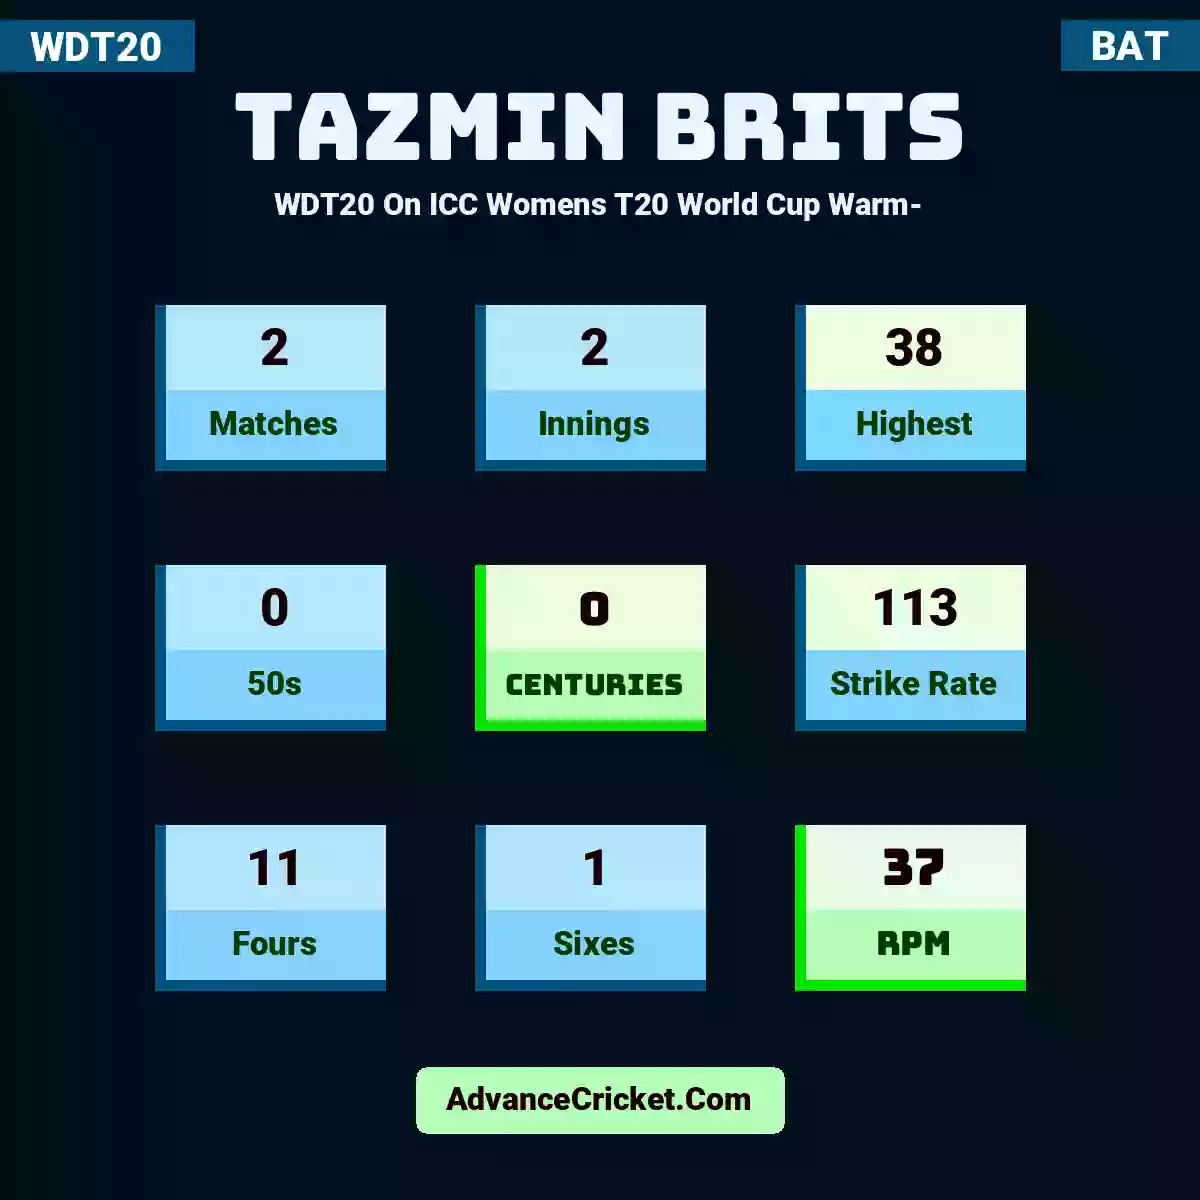 Tazmin Brits WDT20  On ICC Womens T20 World Cup Warm-, Tazmin Brits played 2 matches, scored 38 runs as highest, 0 half-centuries, and 0 centuries, with a strike rate of 113. T.Brits hit 11 fours and 1 sixes, with an RPM of 37.